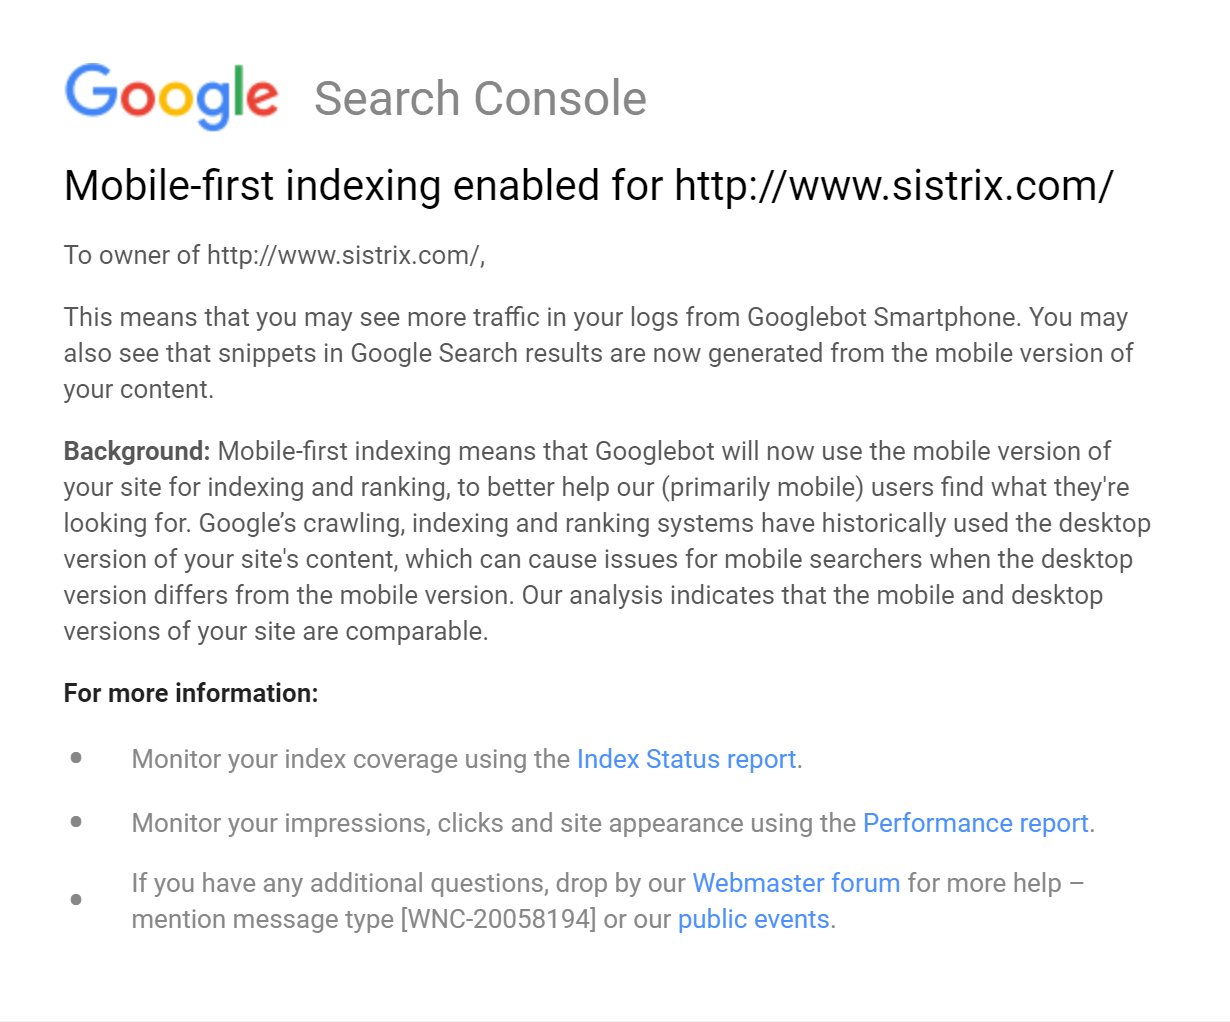 The mobile-first email that comes from Google